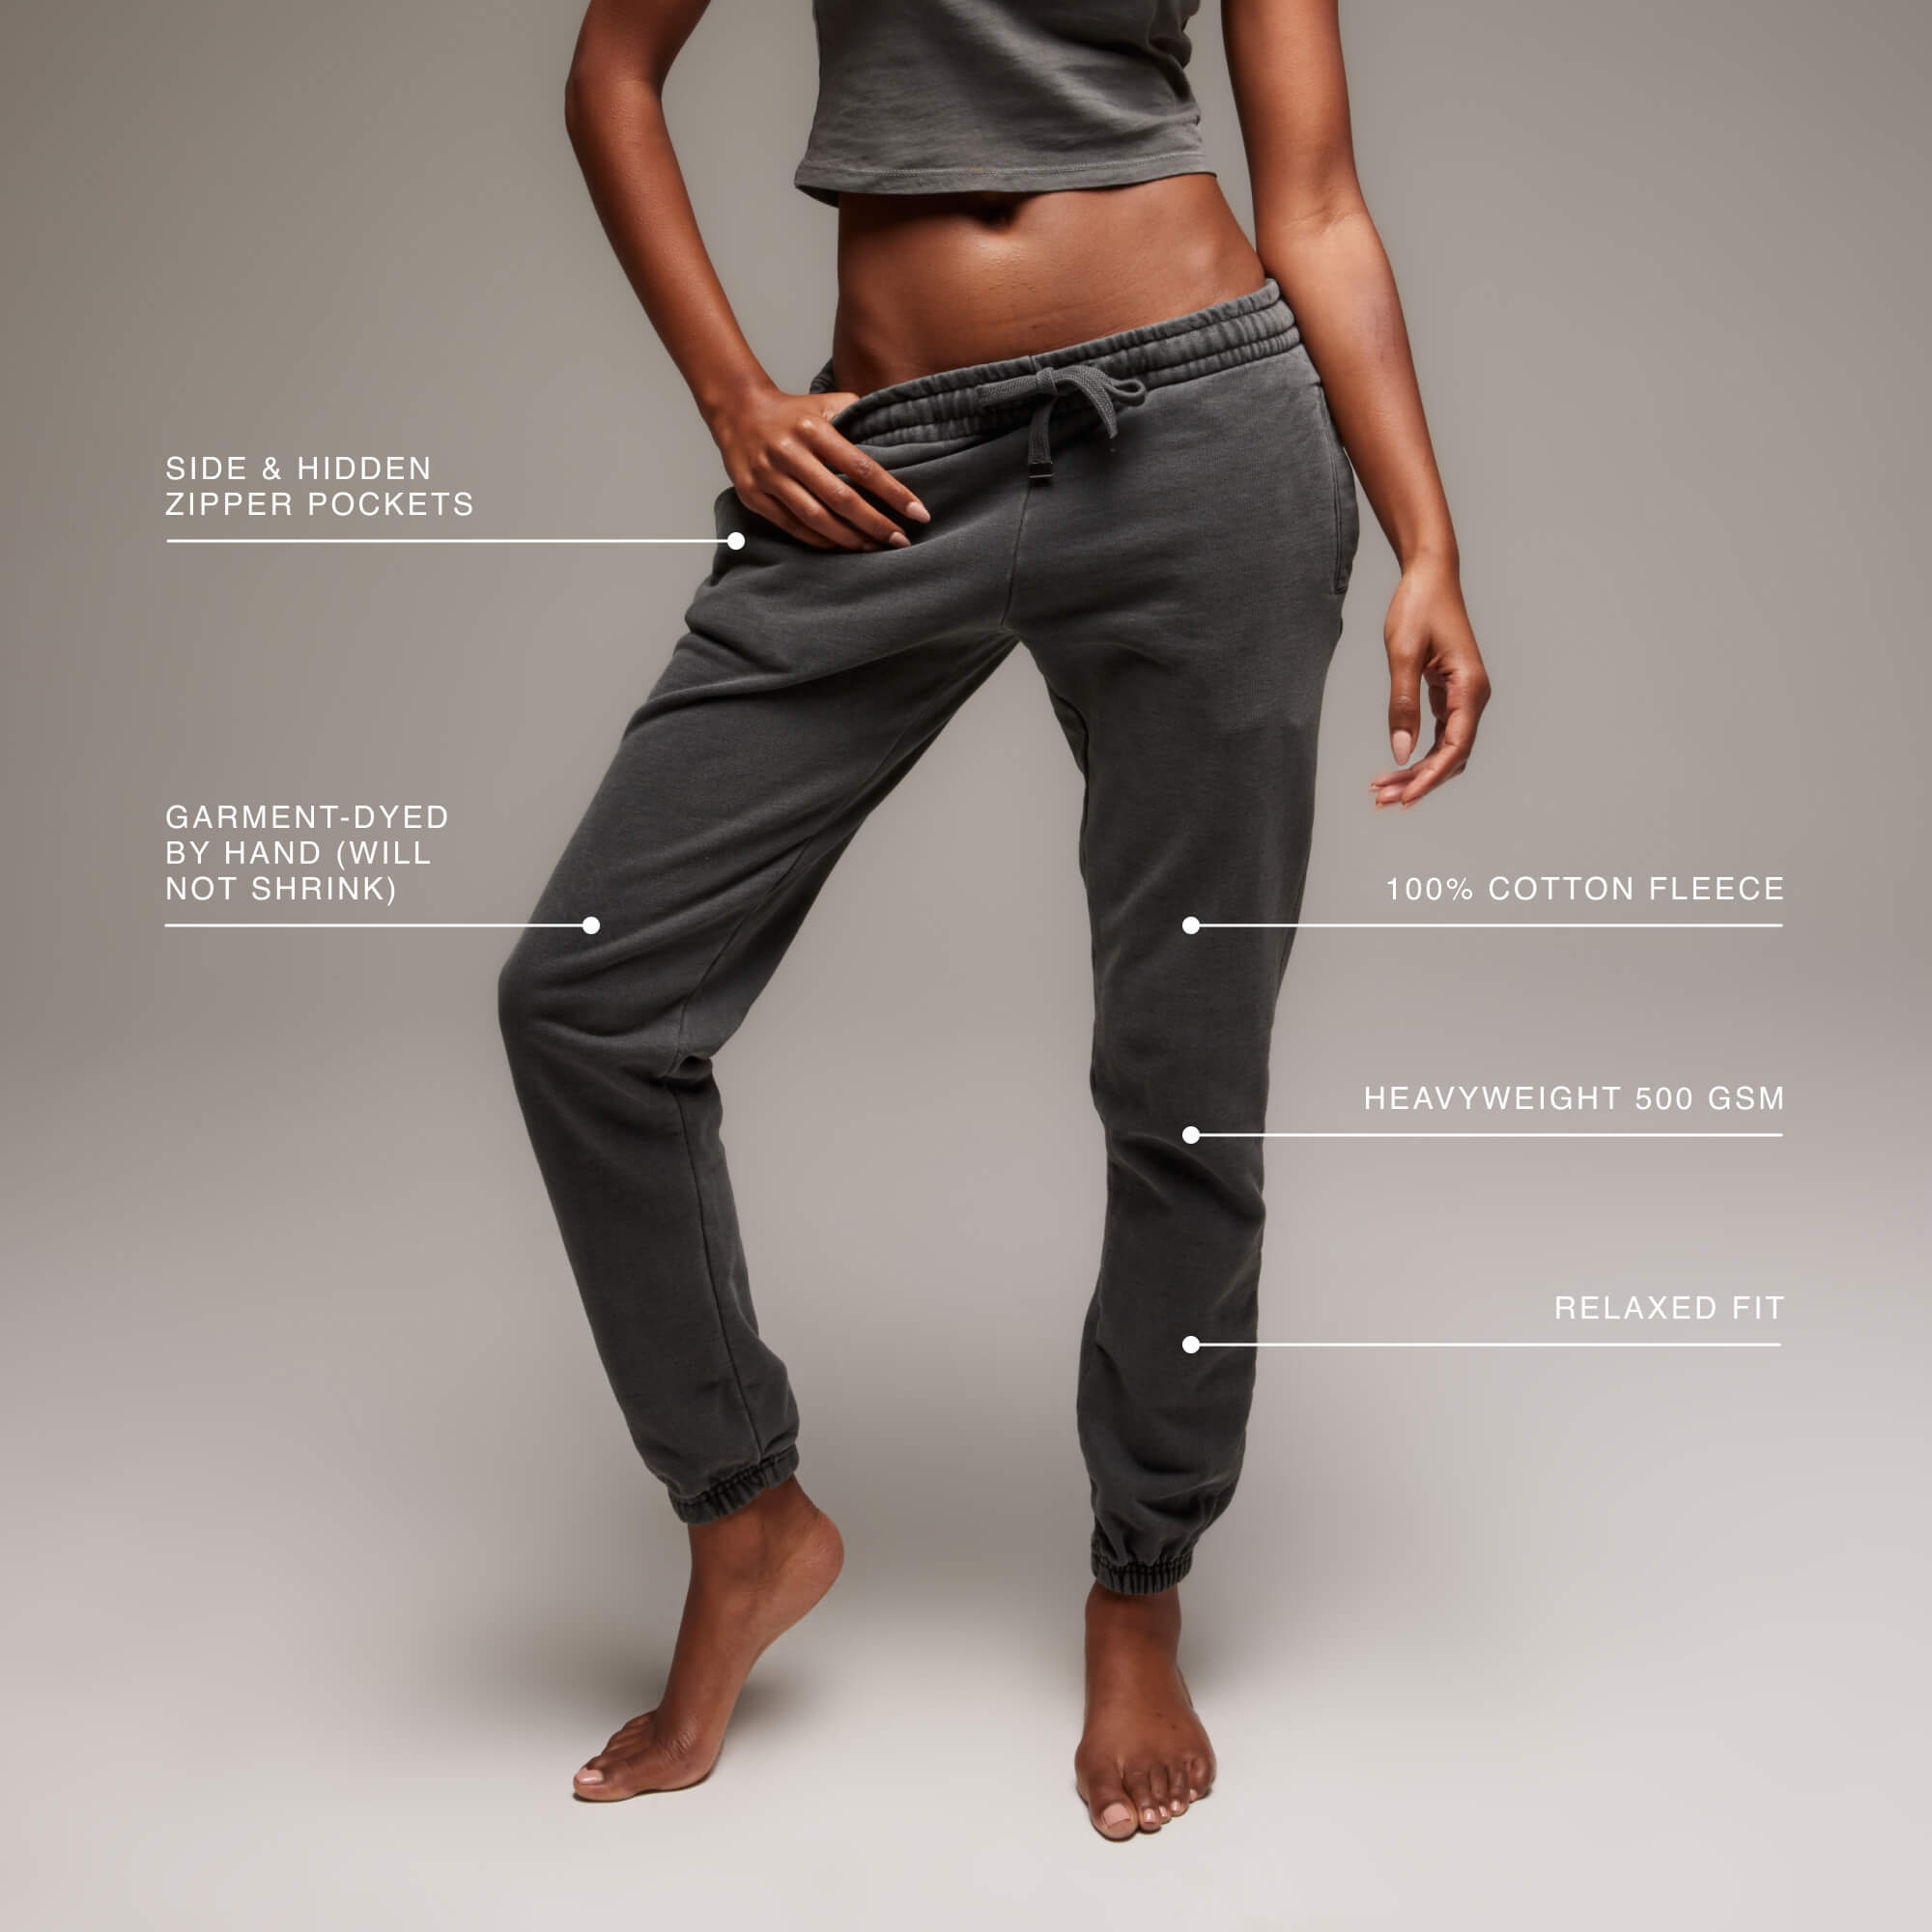 Model wearing the womens heavyweight sweatpants, showing features such as the side hidden zipper pockets, relaxed fit and heavyweight 500 GSM fabric.